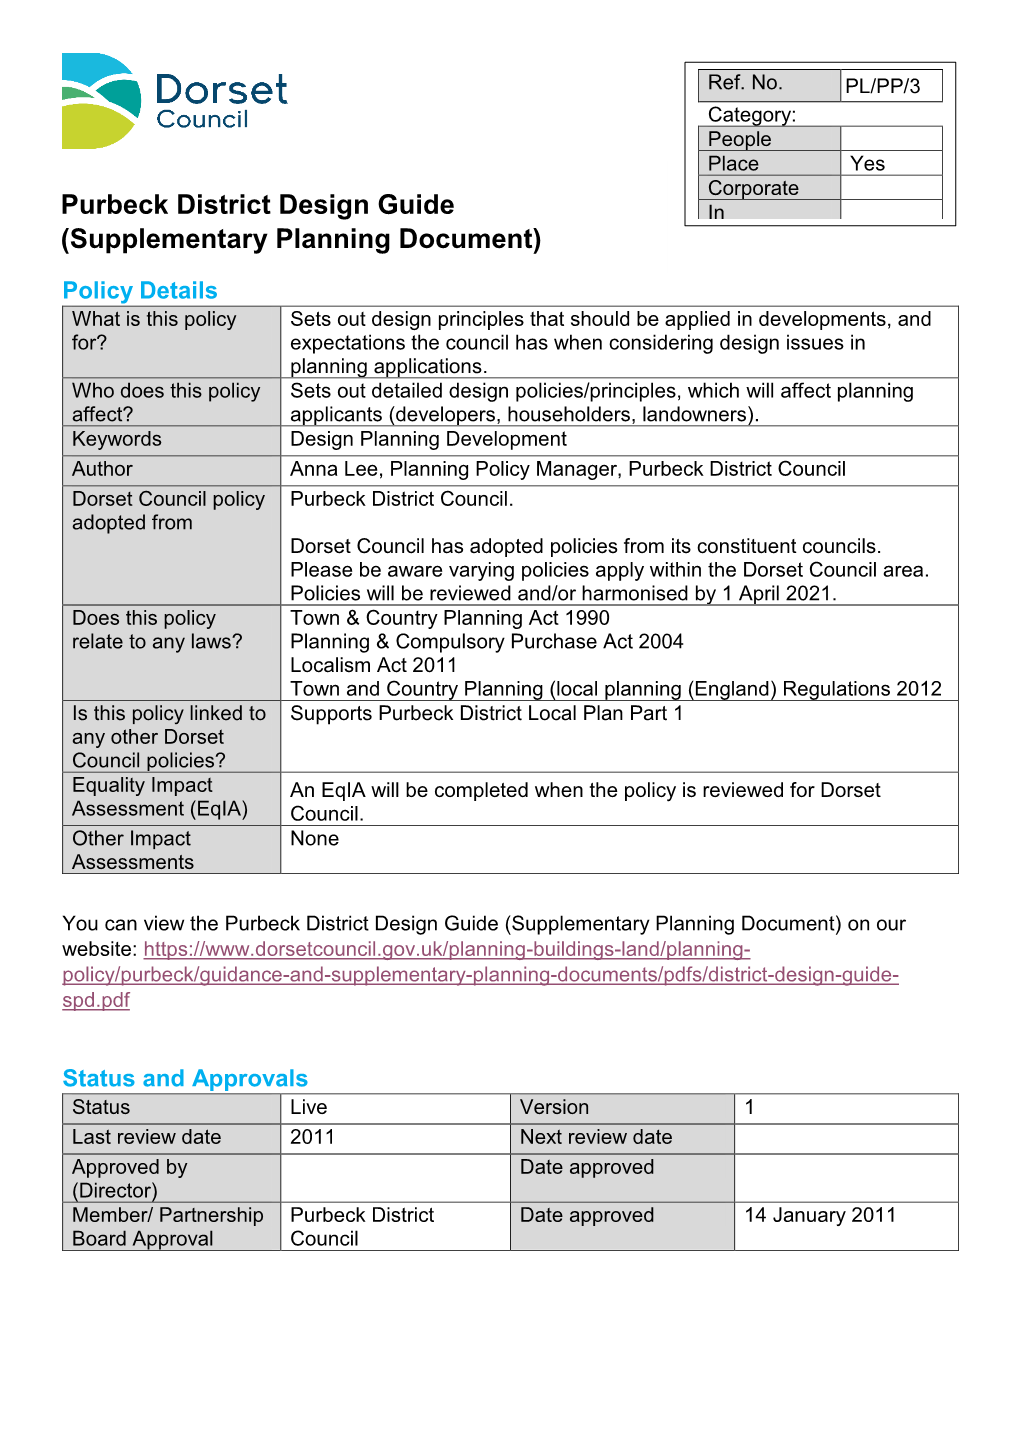 Purbeck District Design Guide Supplementary Planning Document